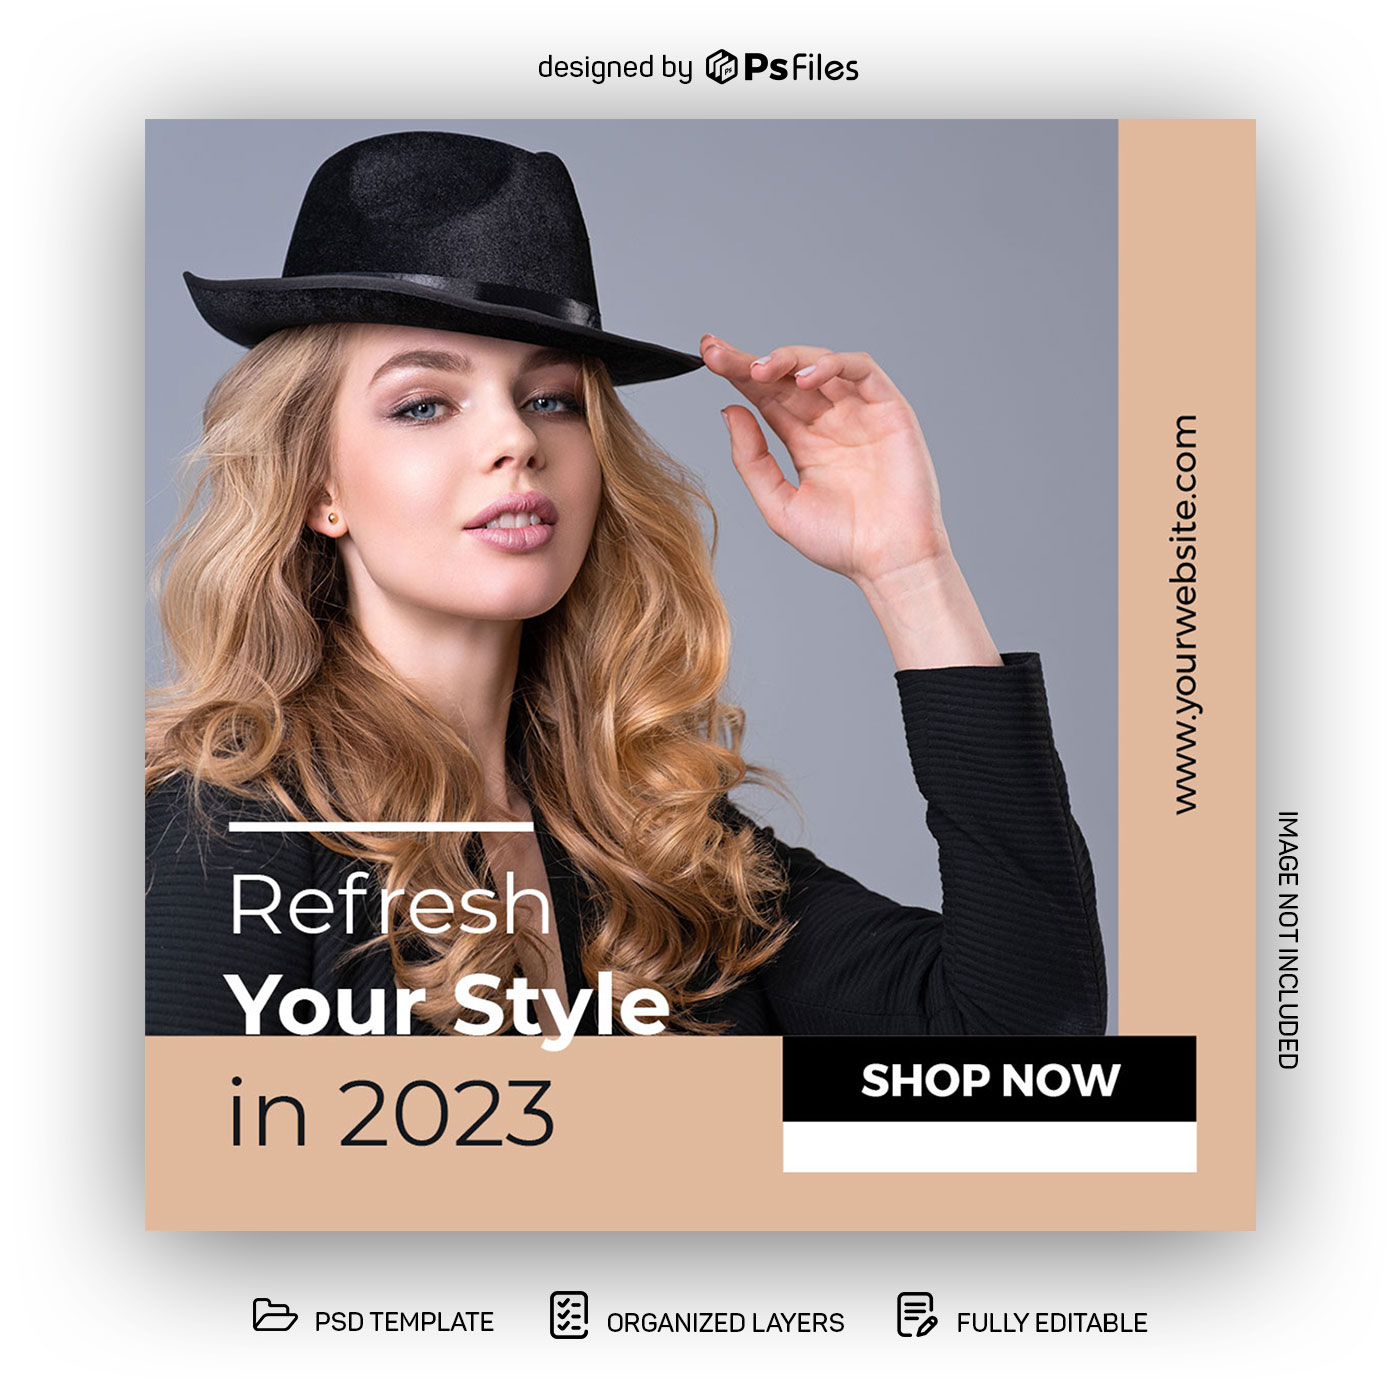 PsFiles Refresh Fashion Style Instagram Post Design Template PSD